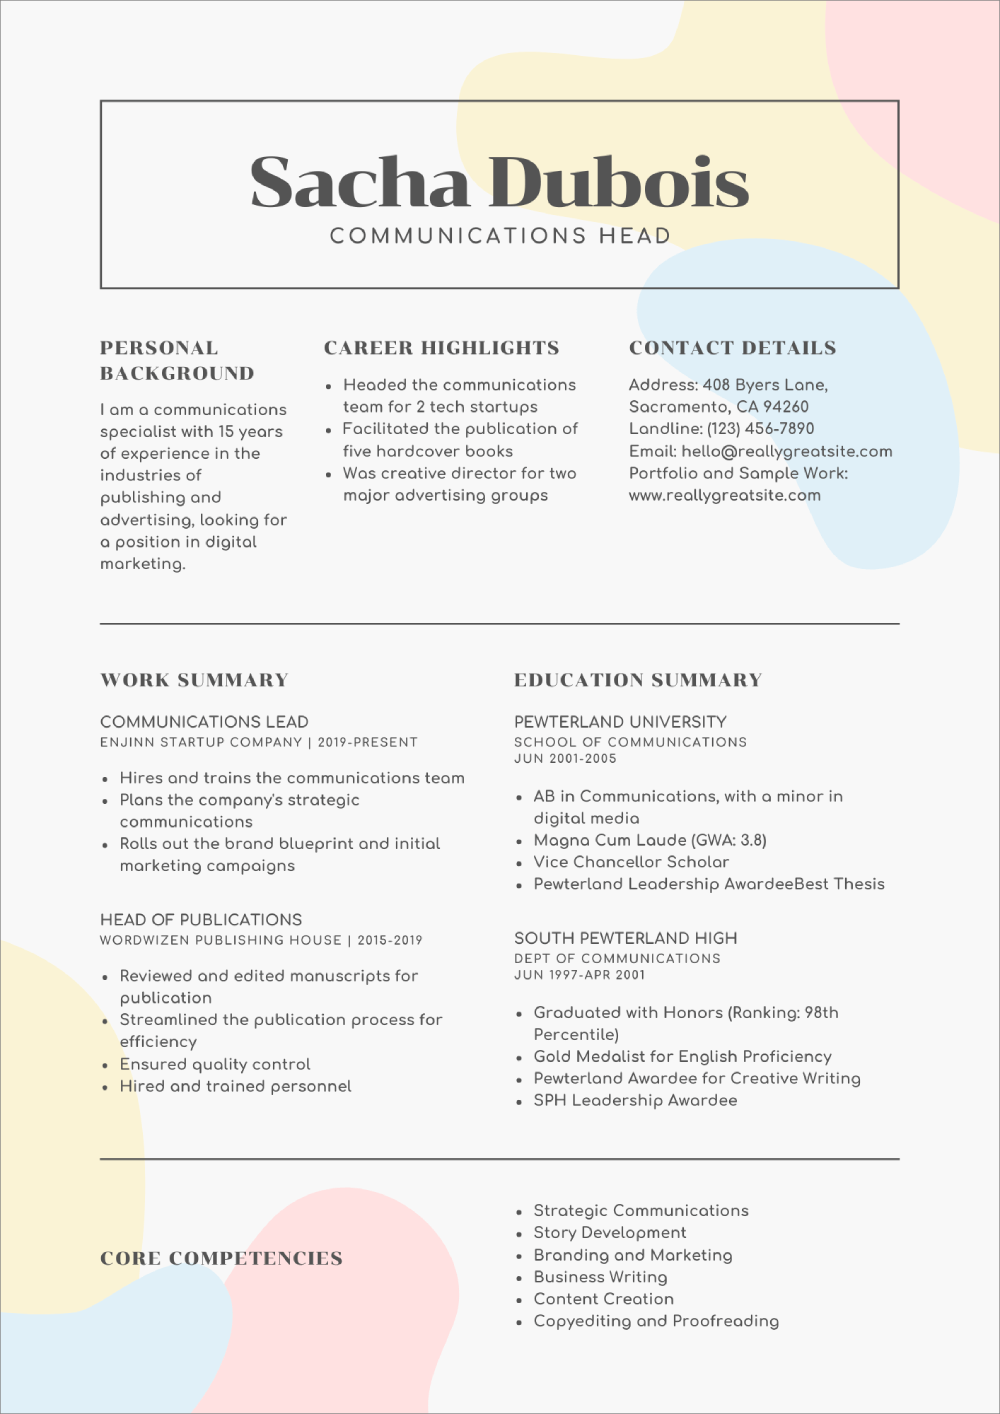 Canva Resumes How To Create A Professional Resume For Free In Canva 